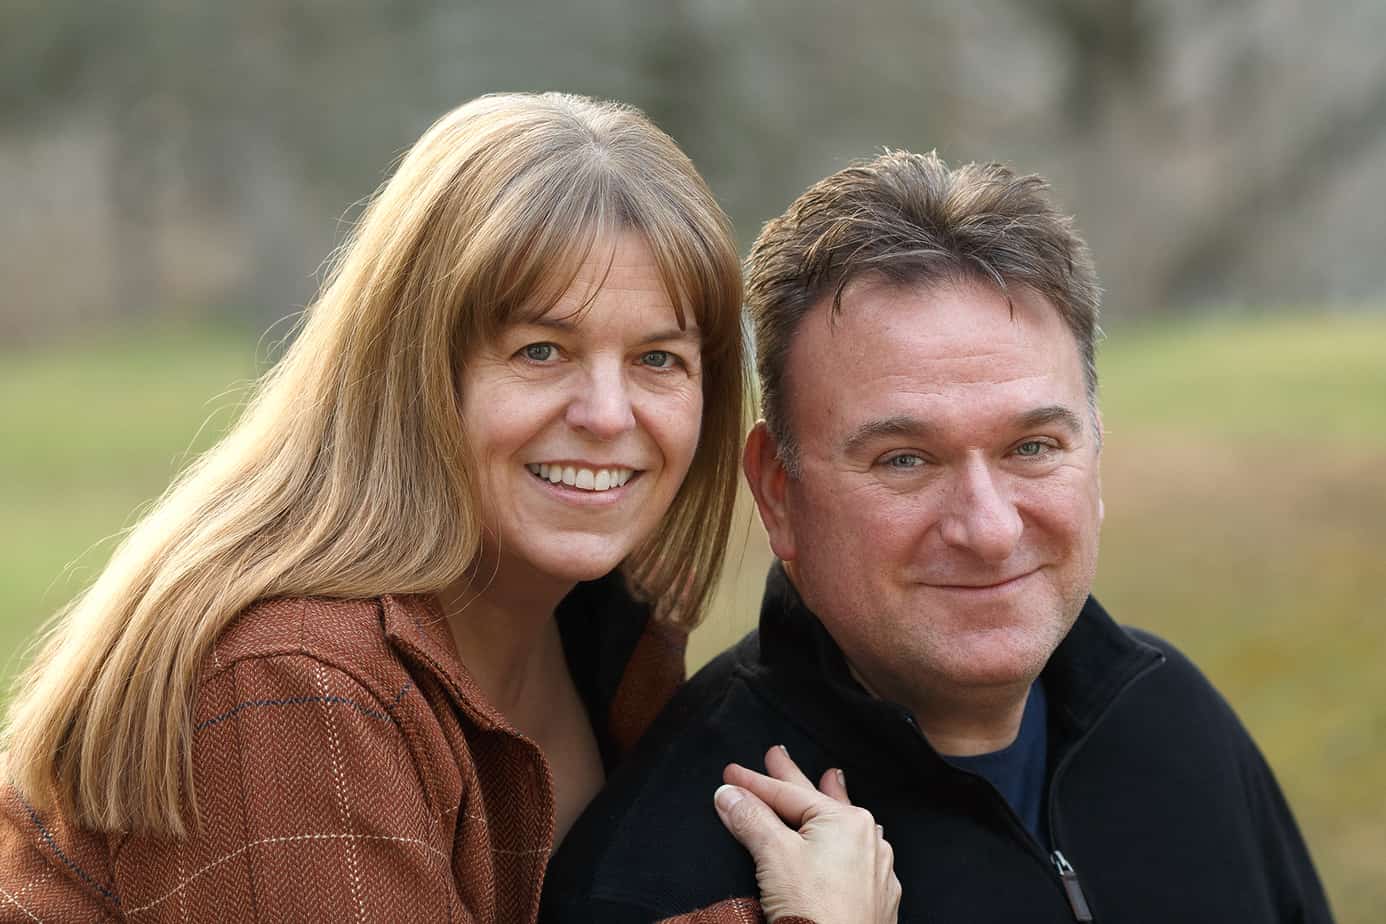 Kim, a woman with single-sided profound hearing loss, with her husband